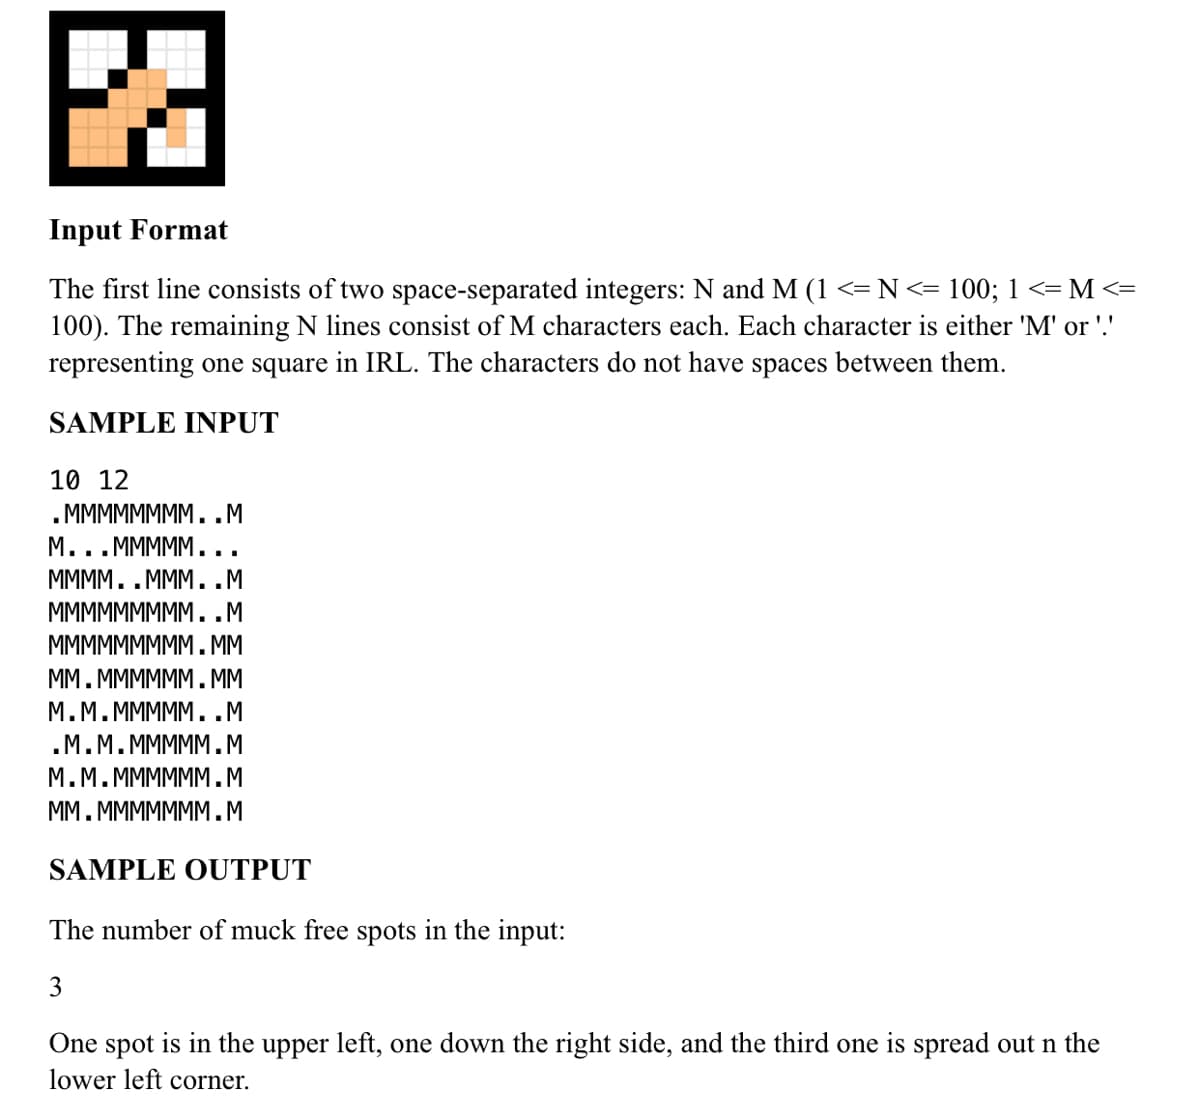 Input Format
The first line consists of two space-separated integers: N and M (1 <= N<= 100; 1 <= M <=
100). The remaining N lines consist of M characters each. Each character is either 'M' or '.'
representing one square in IRL. The characters do not have spaces between them.
SAMPLE INPUT
10 12
. MMMMMMMM..M
М...МММММ...
MMMM..MMM..M
МMМMMMMMM..М
МMMMMMMMM.MМ
MM. MMMMMM. MM
М.М.МММMM..М
.М.М.МММММ.М
М.М.МMMMMМ.М
MM. MMMMMMM.M
SAMPLE OUTPUT
The number of muck free spots in the input:
3
One spot is in the upper left, one down the right side, and the third one is spread out n the
lower left corner.
